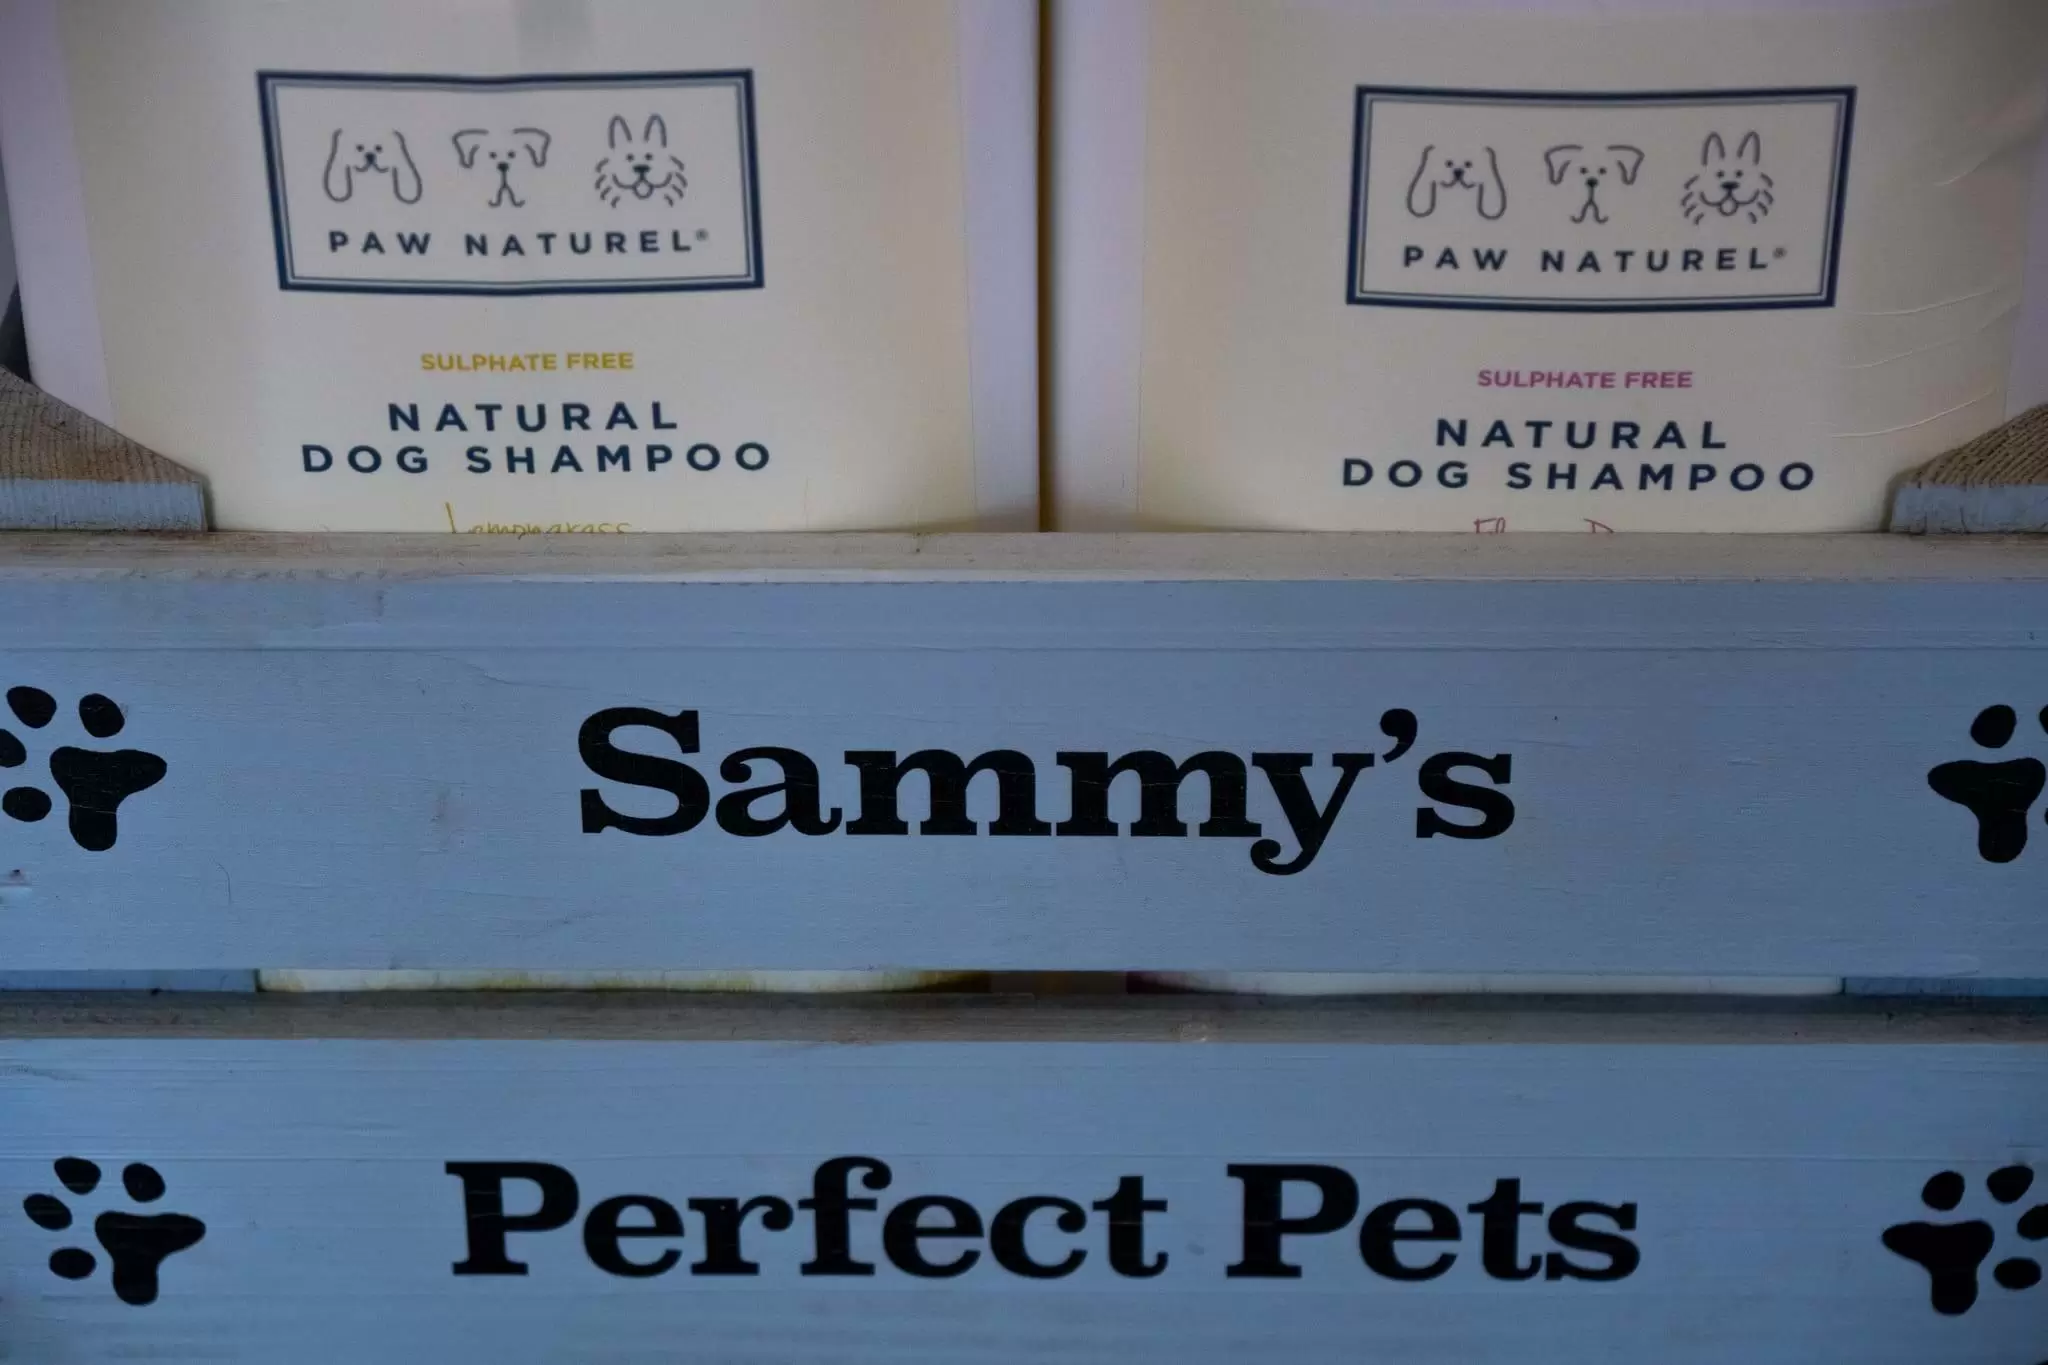 The Dog shampoo Paw Naturel in a Sammy's Perfect Pets Wooden Crate